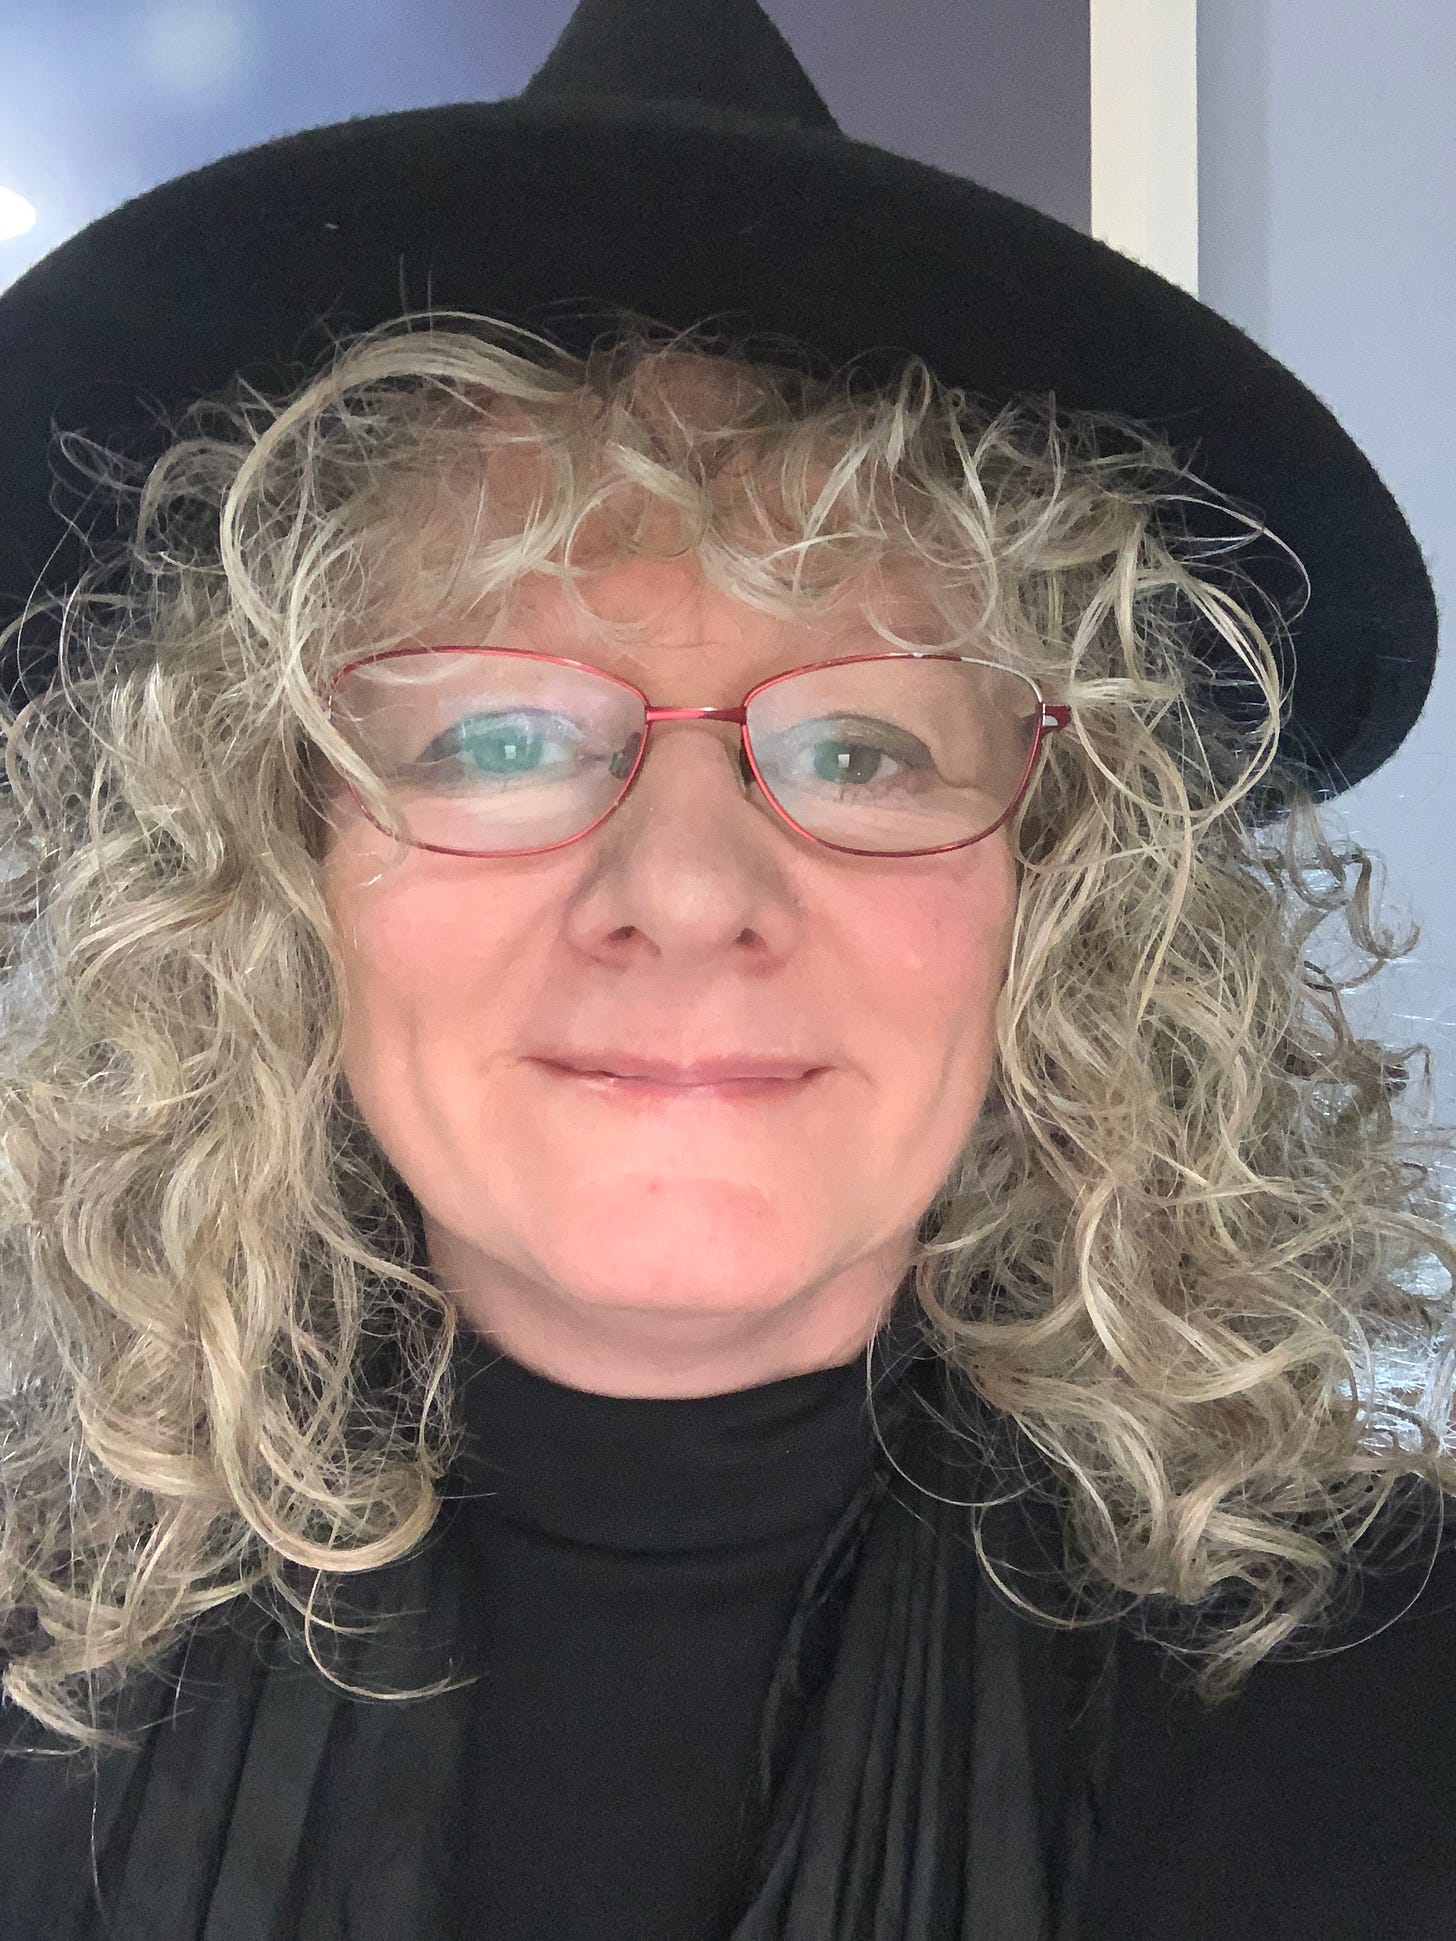 A woman’s face, with silver curly hair, red glasses and a black hat. 